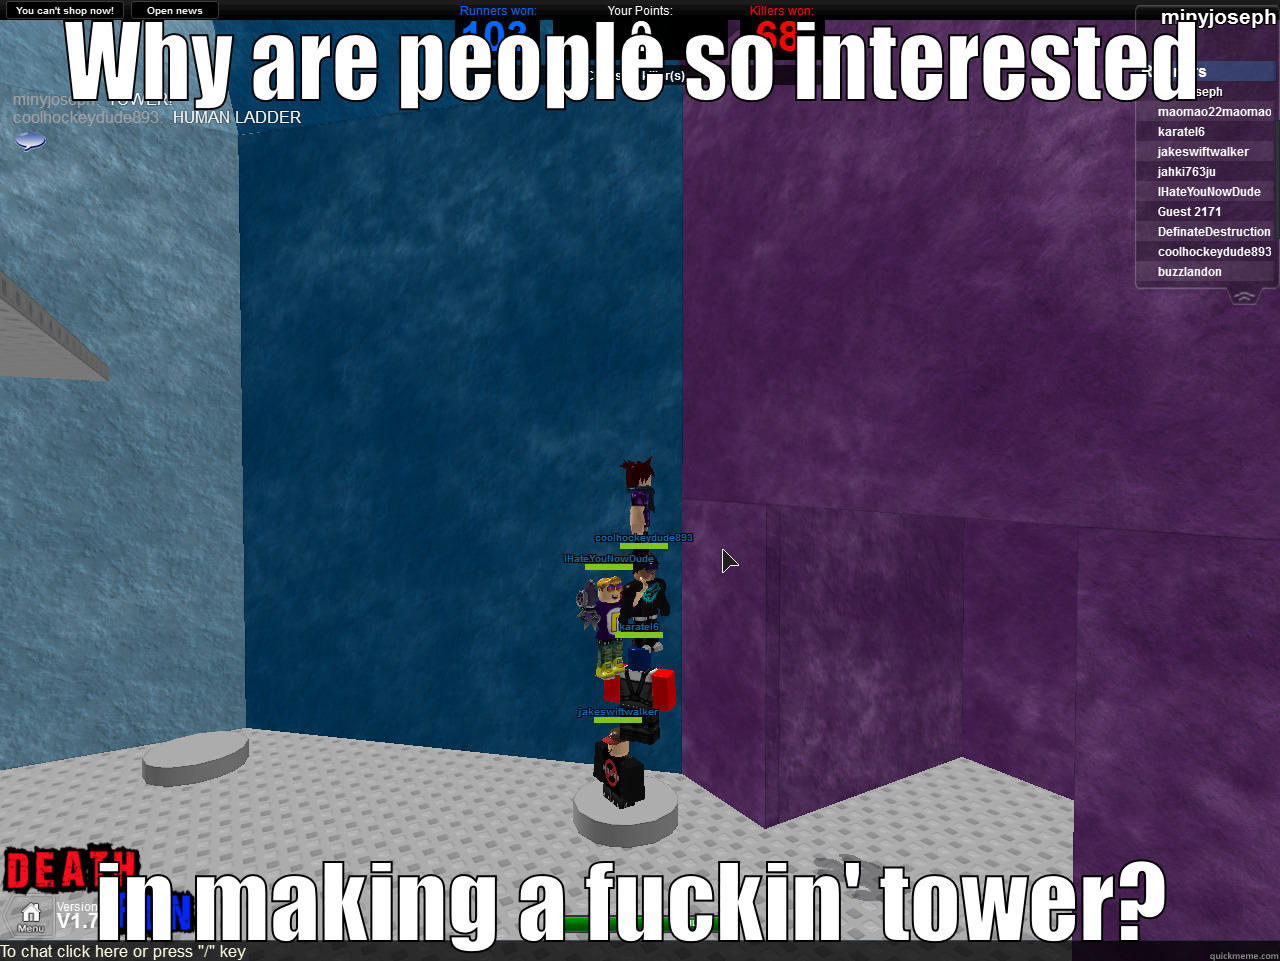 WHY ARE PEOPLE SO INTERESTED IN MAKING A FUCKIN' TOWER? Misc